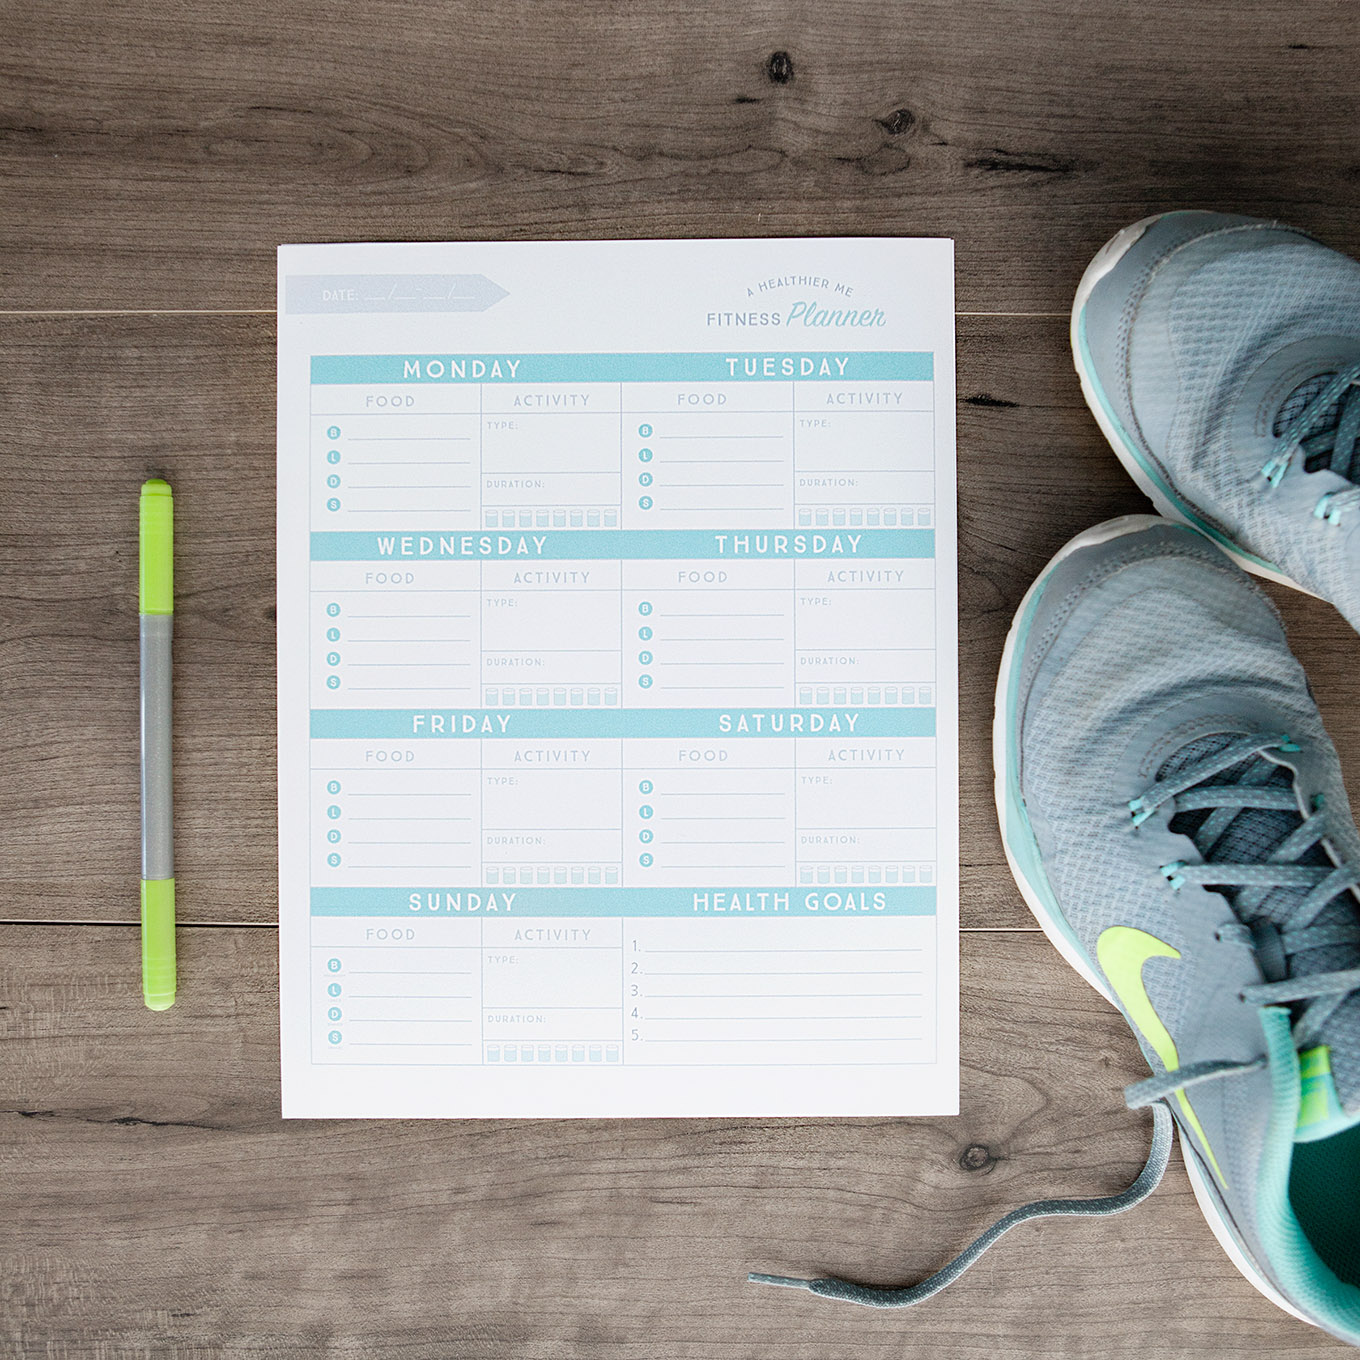 Set yourself up for success and become a healthier "you" with this free printable fitness planner.